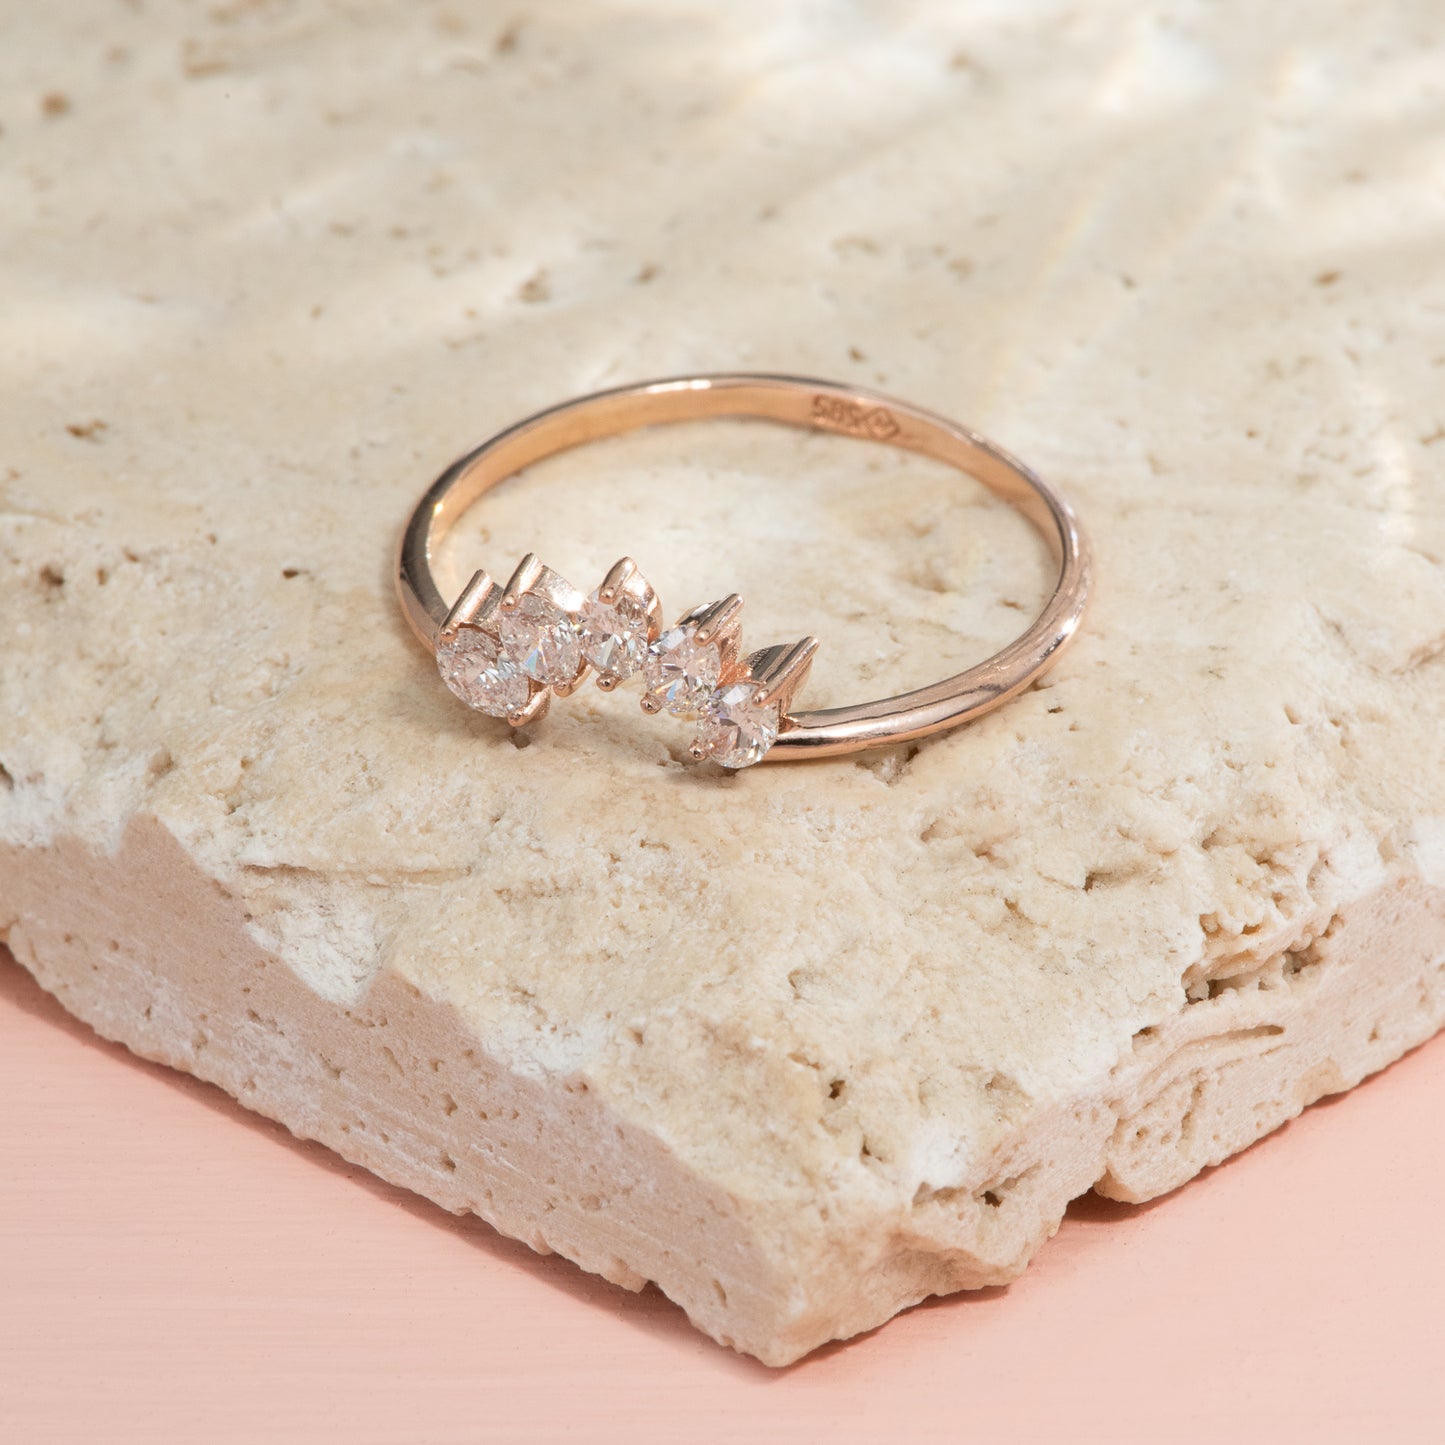 A half round polished rose gold band with 5 oval diamonds set in a rounded chevron.